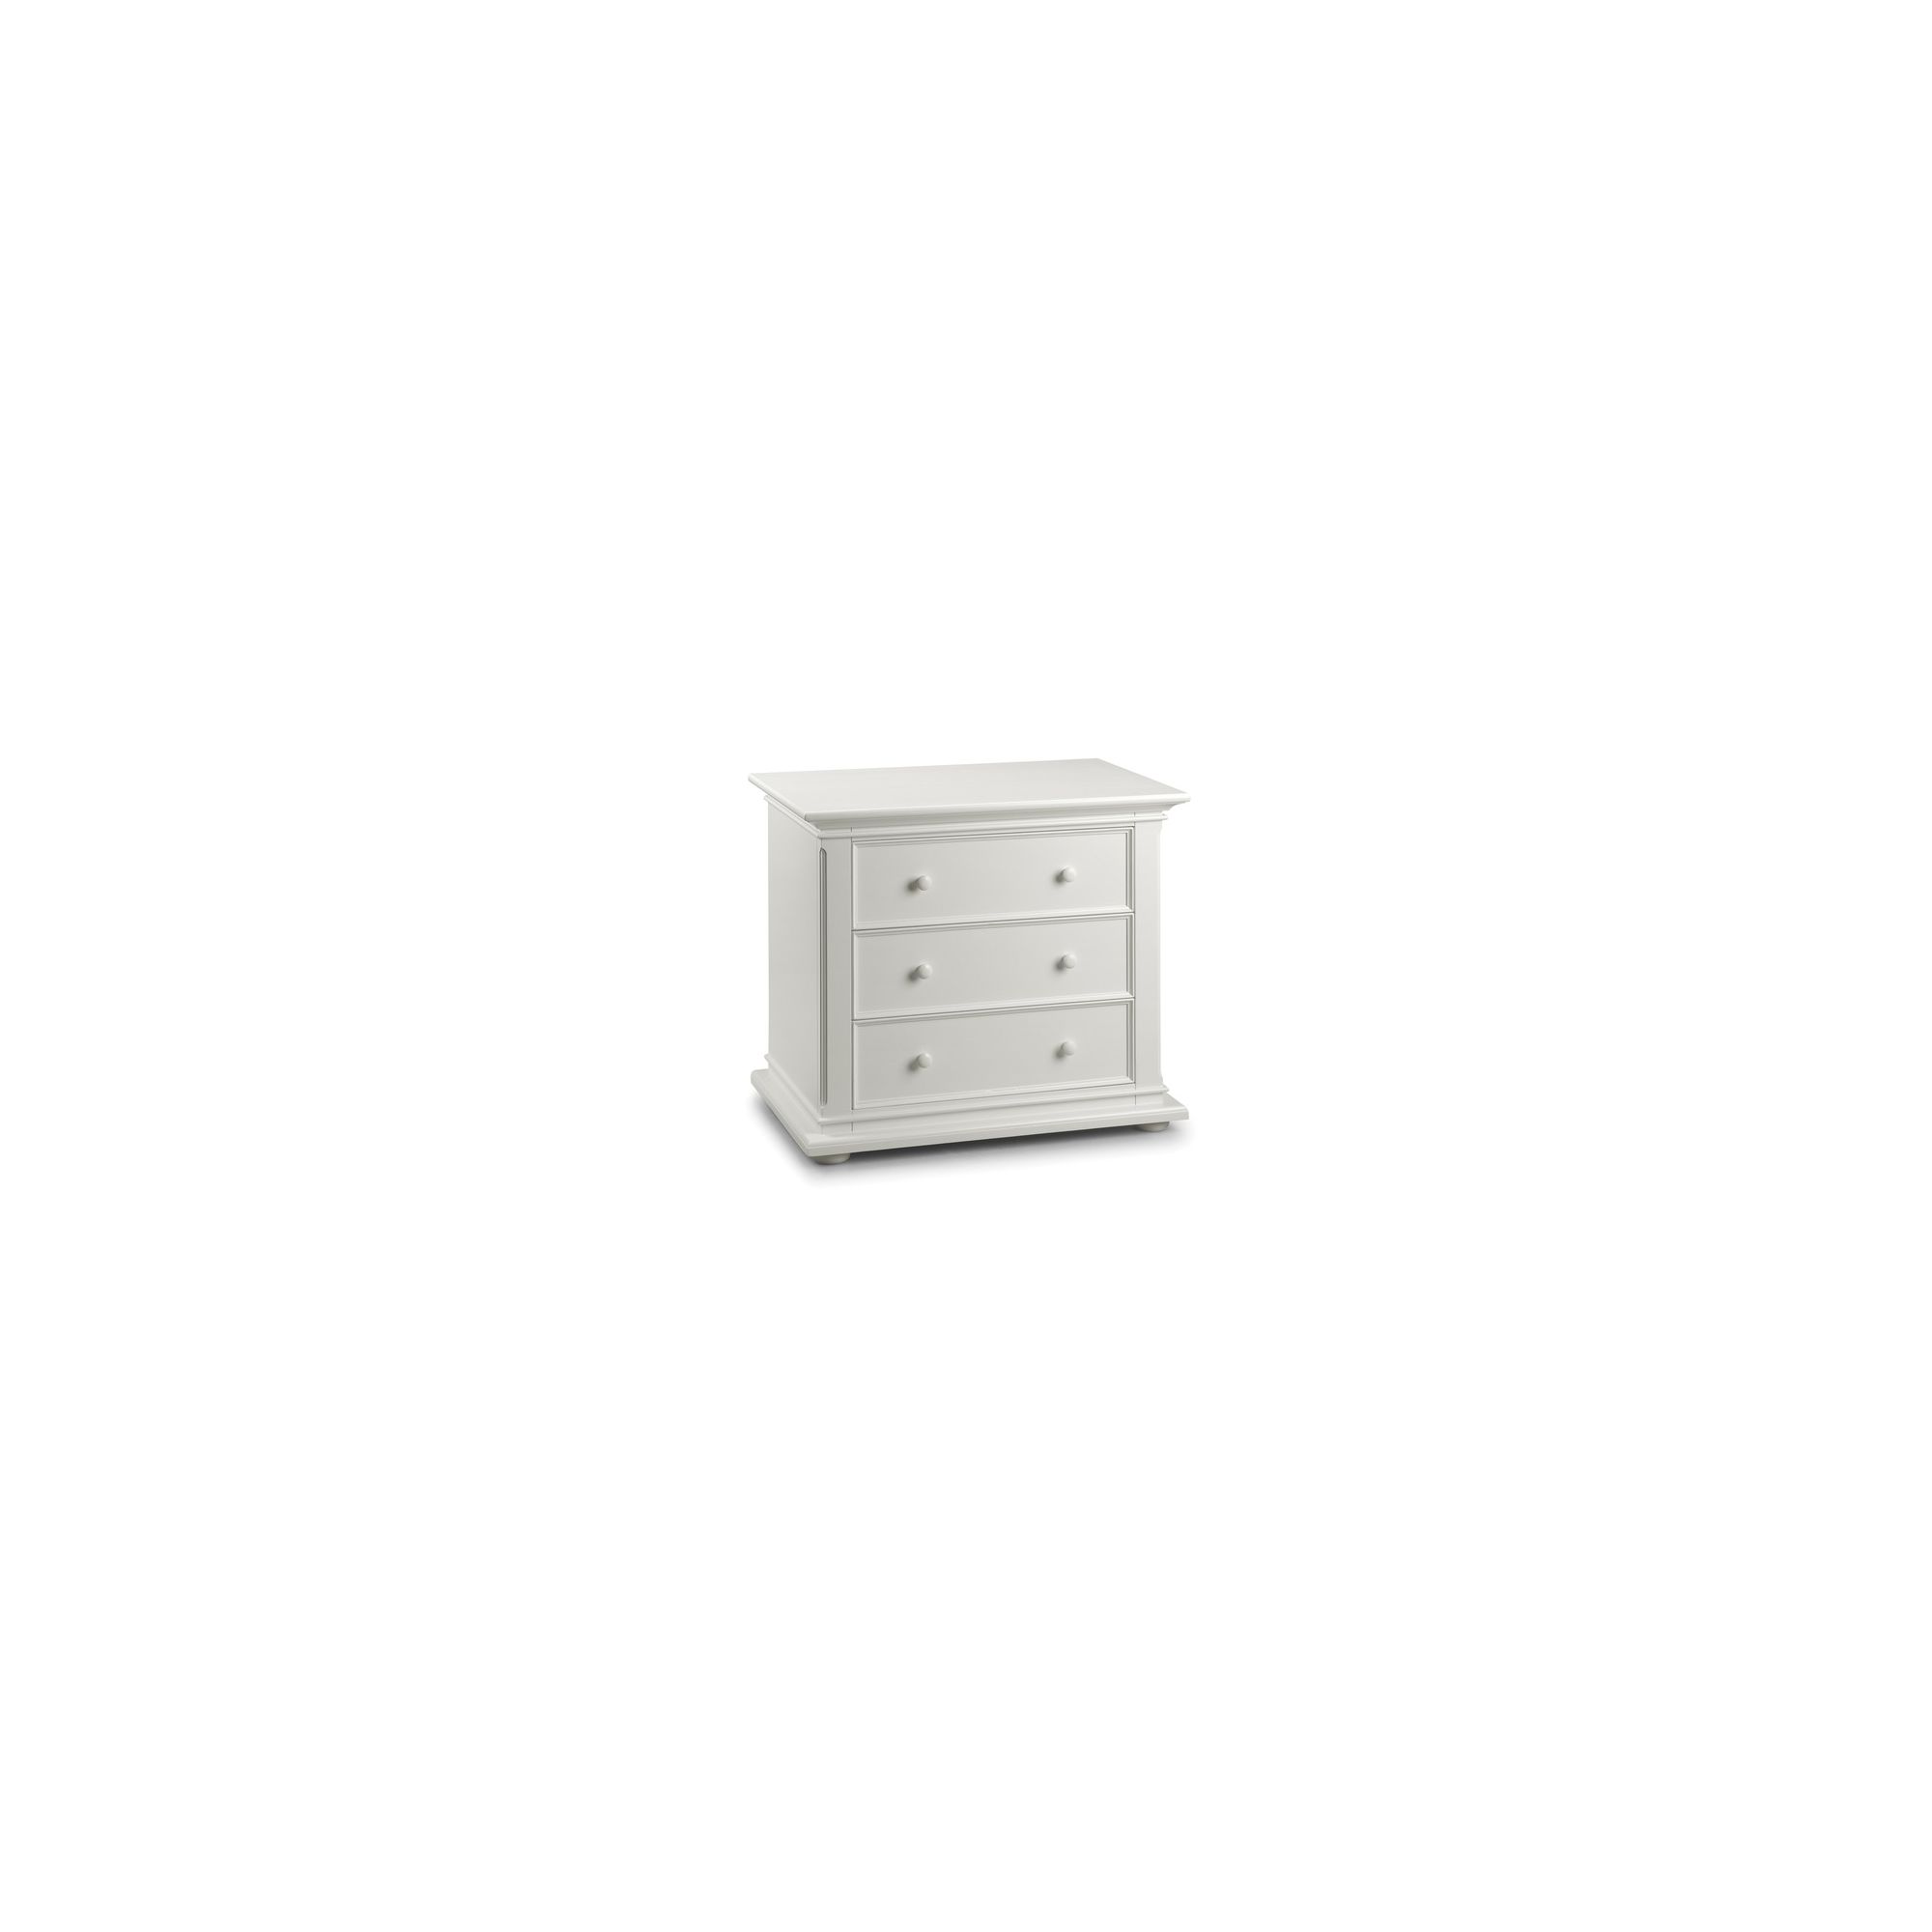 Julian Bowen Josephine 3 Drawer Chest in Off White at Tescos Direct